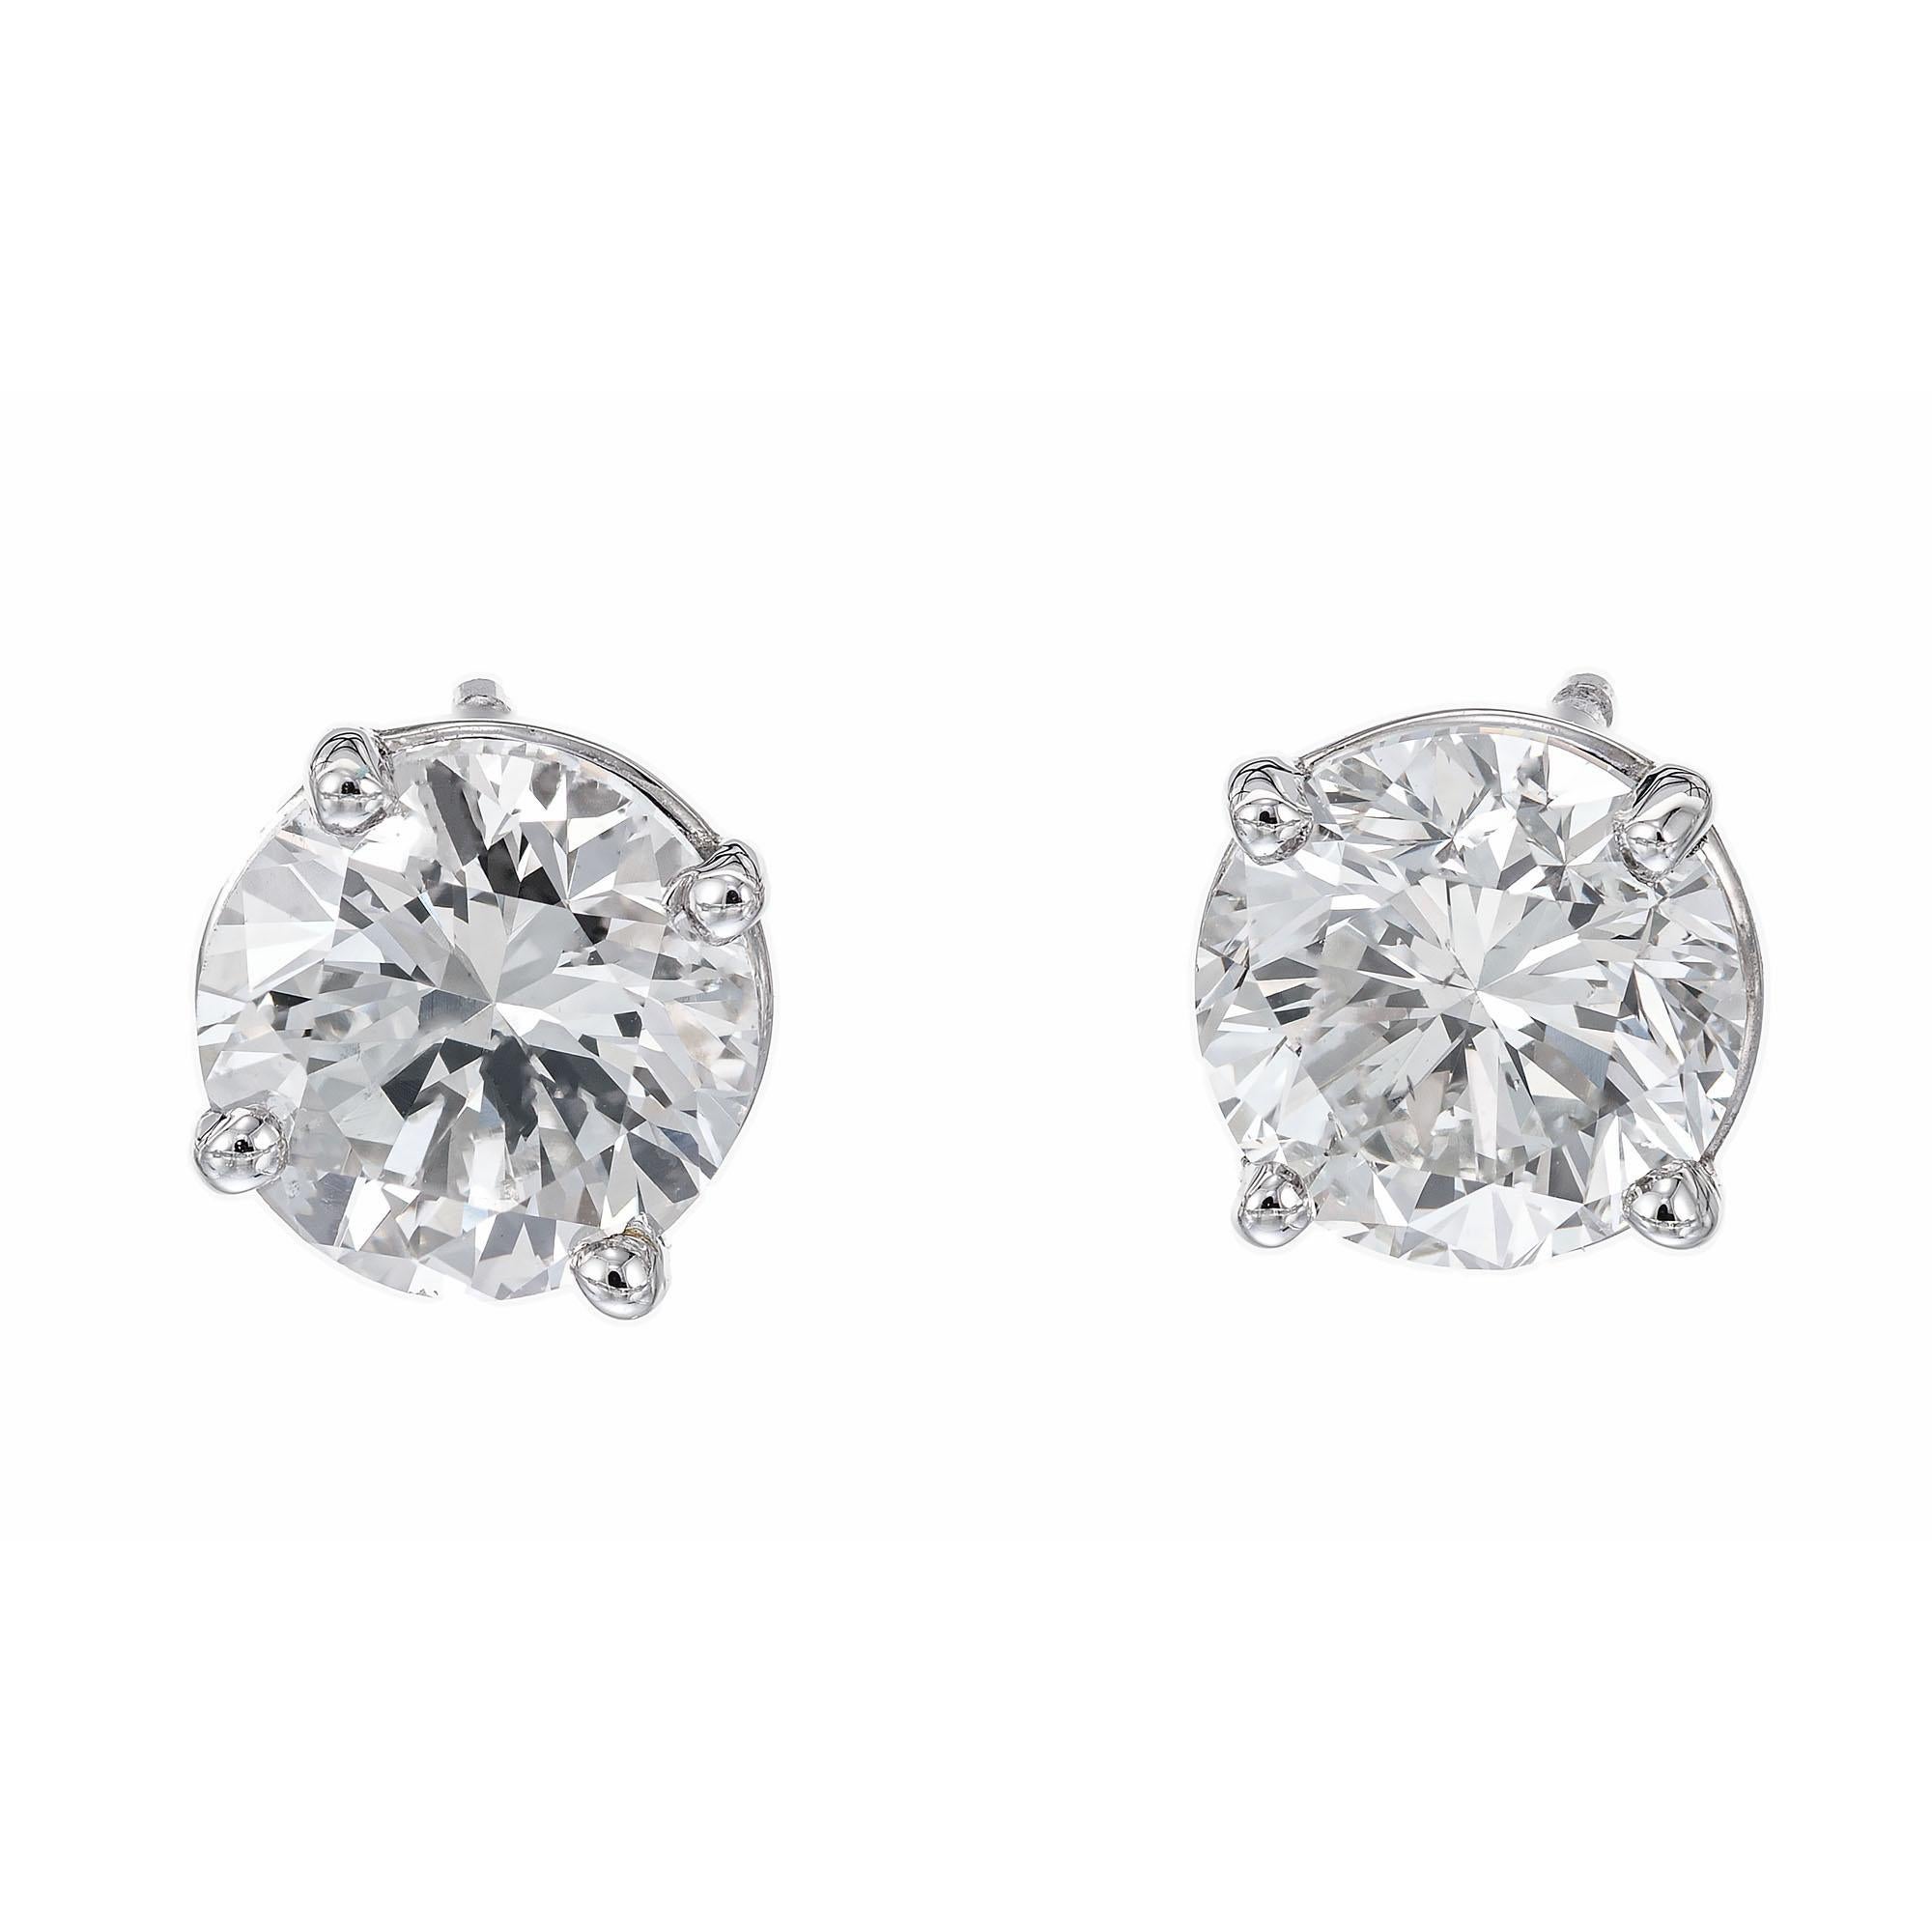 Diamond stud earrings. GIA Certified European transitional cut diamonds mounted in platinum baskets. Designed and crafted in the Peter Suchy workshop.

1 round brilliant cut diamond, J SI2 approx. 1.00ct GIA Certificate # 5181038115
1 round